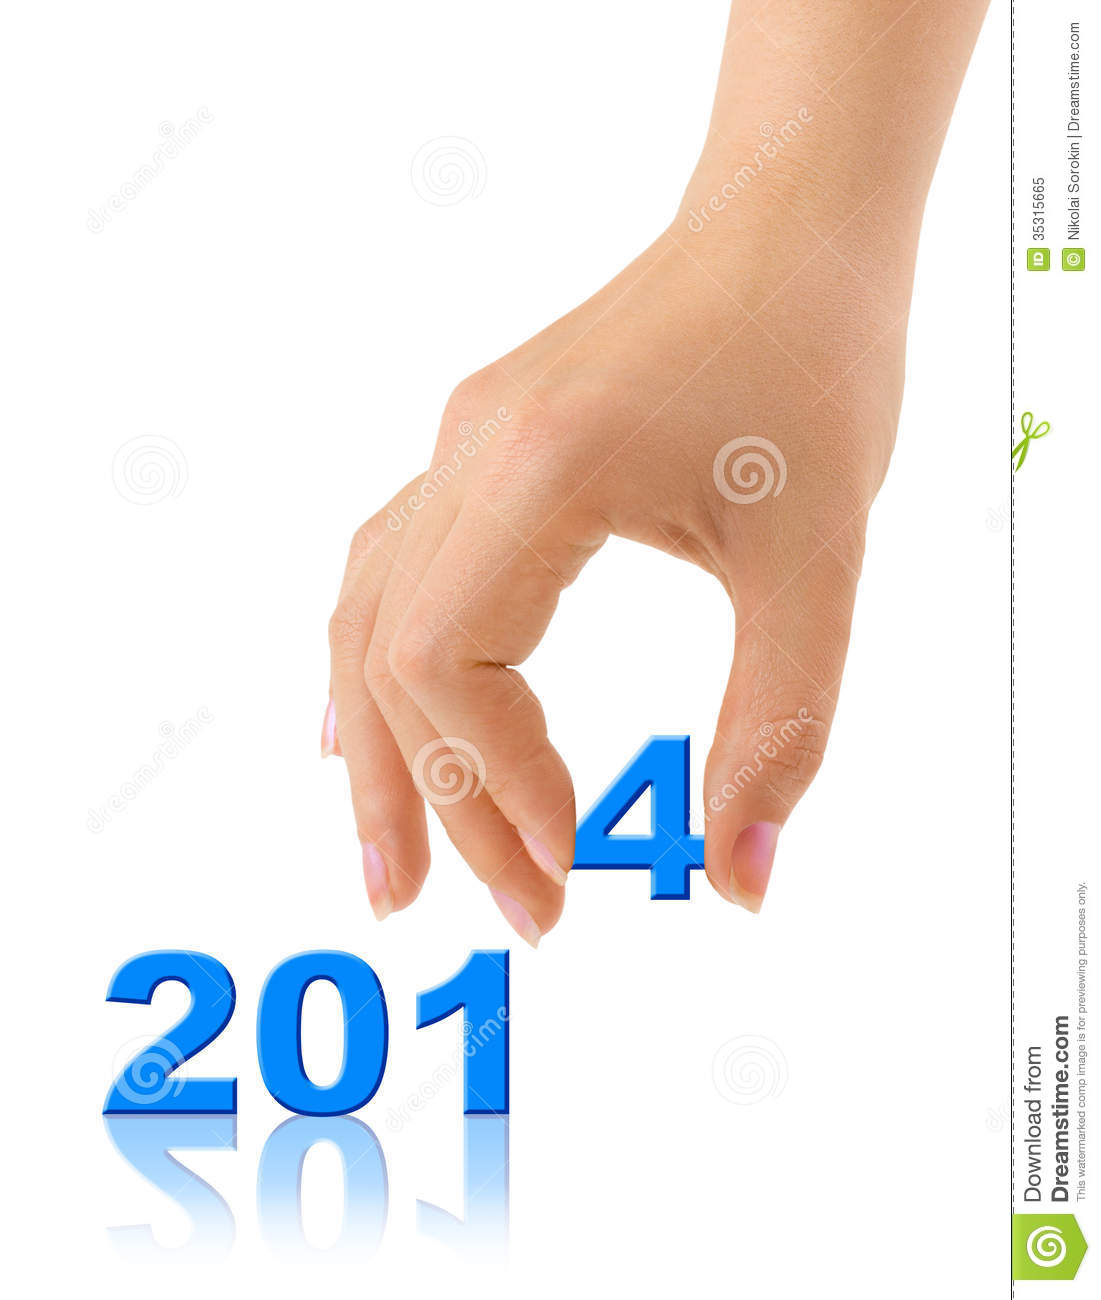 Numbers 2014 And Hand Royalty Free Stock Photo   Image  35315665